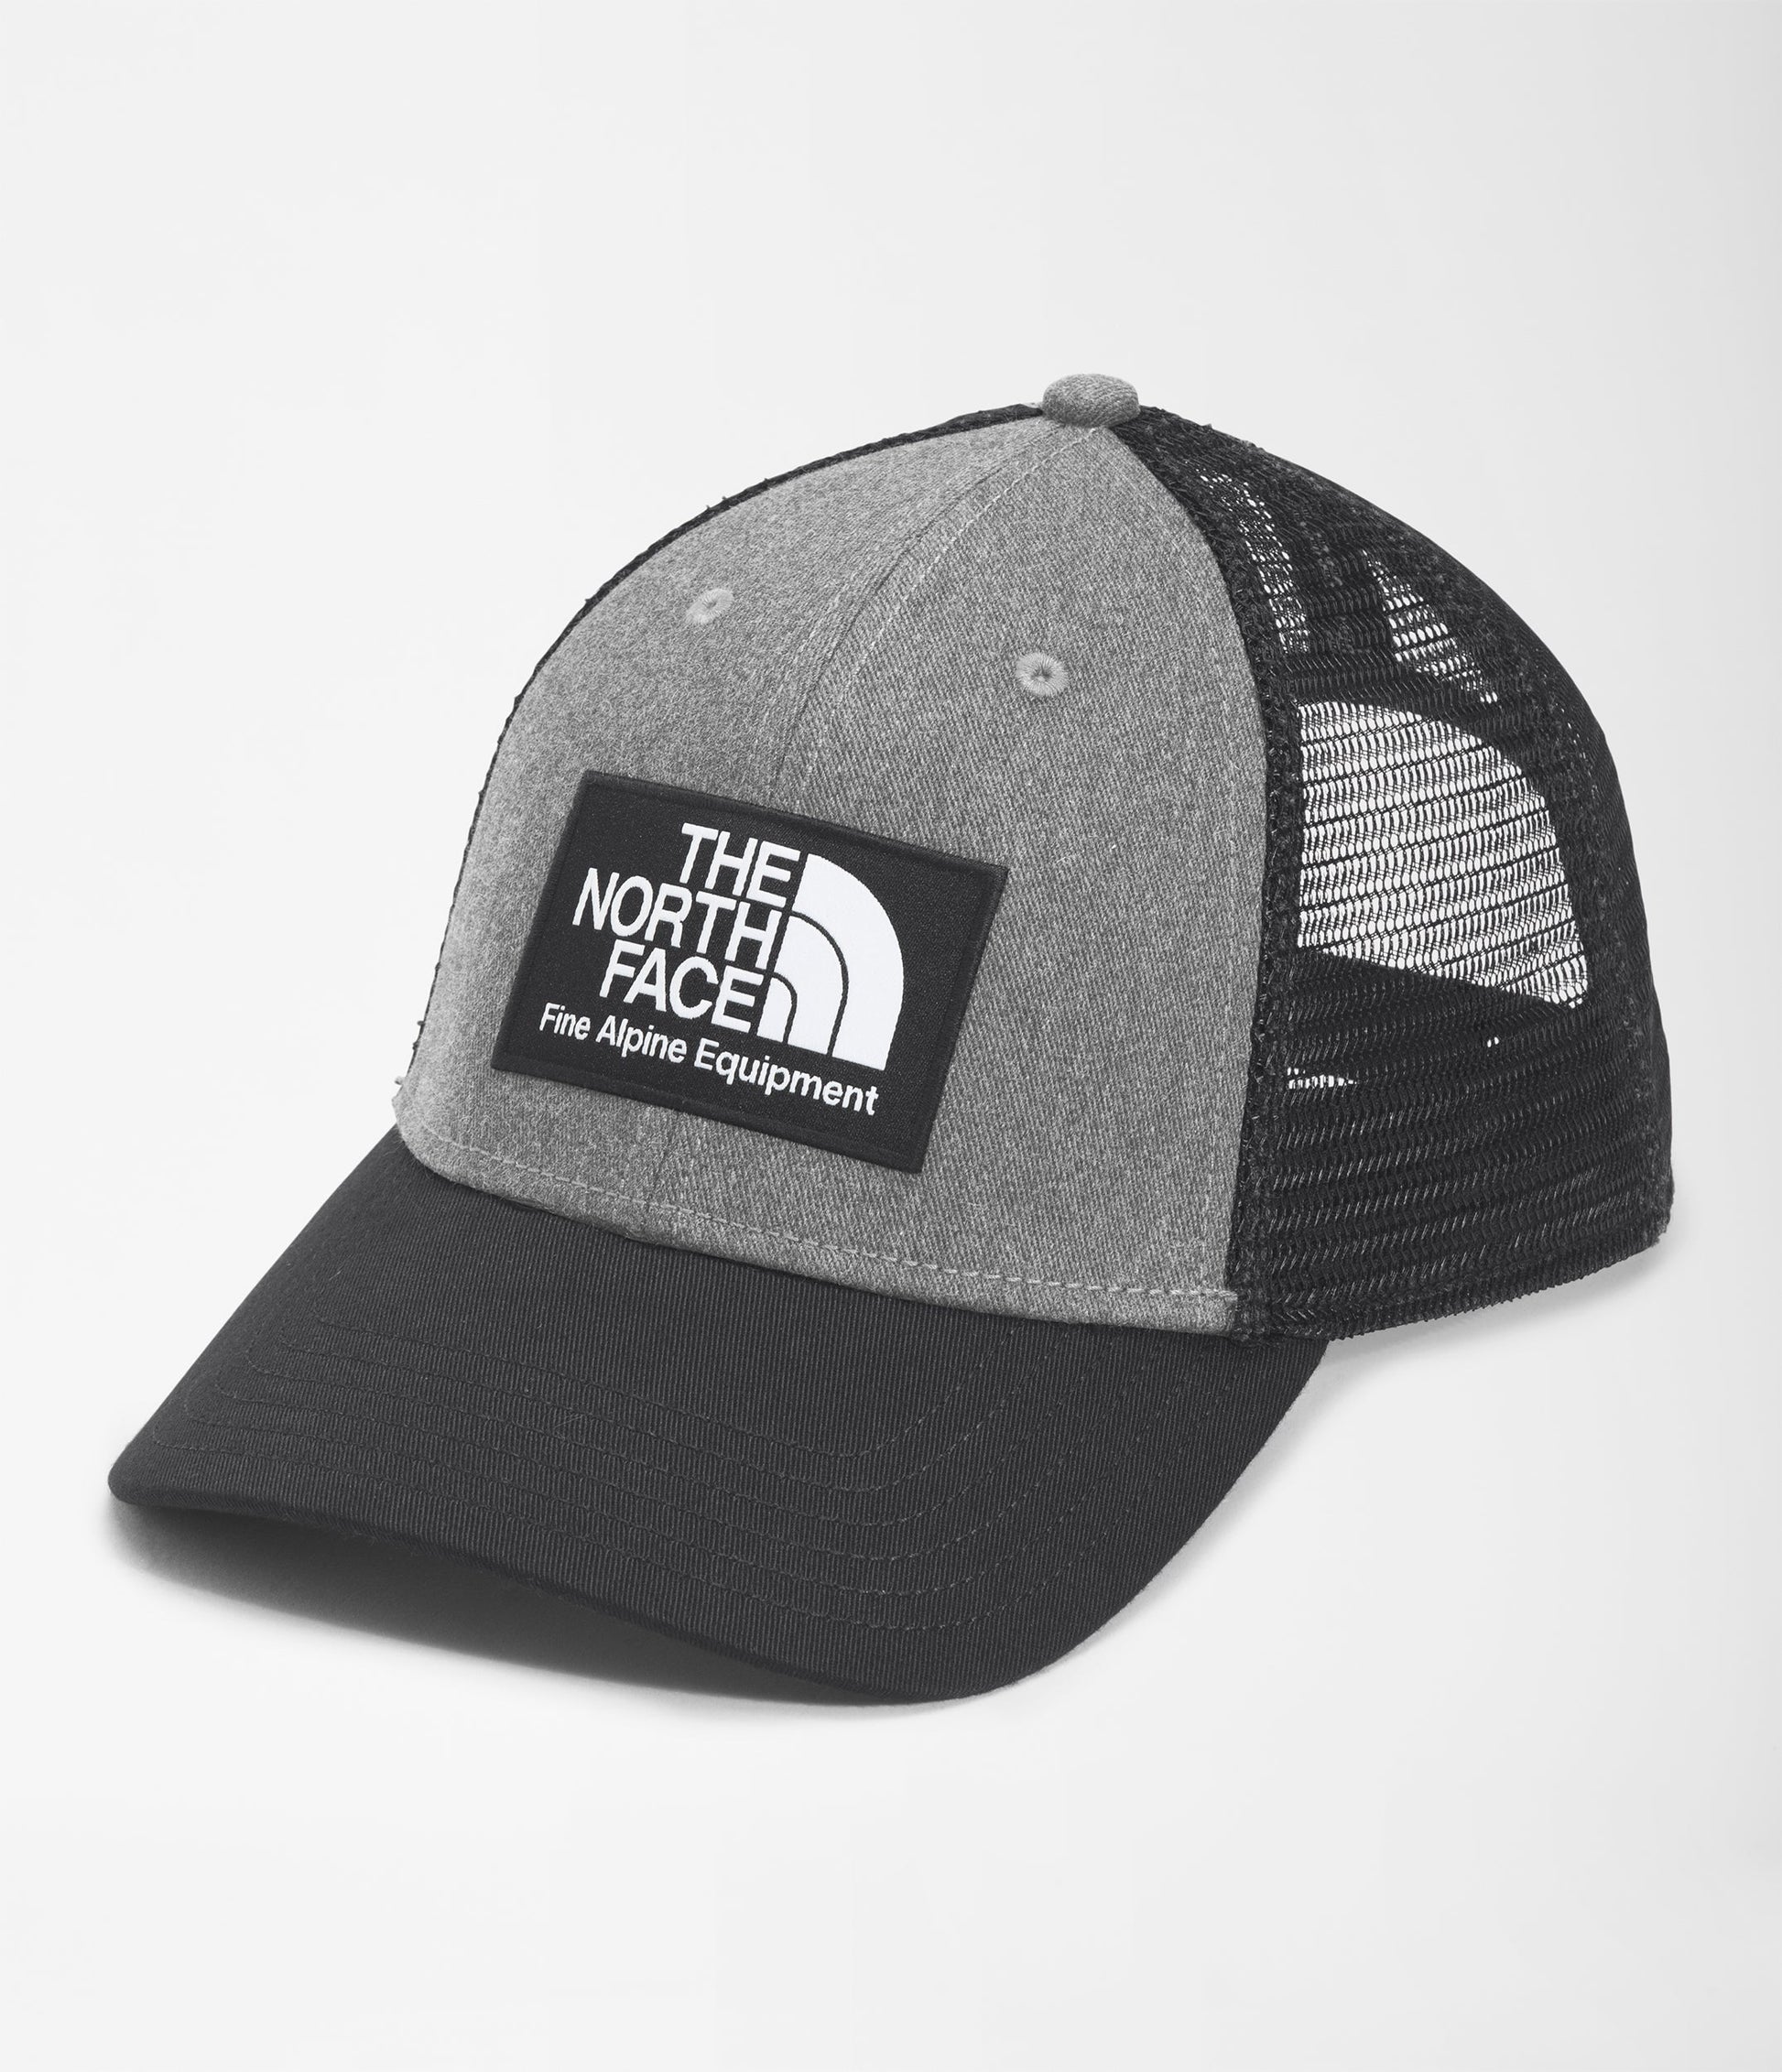 Gorra Mudder Trucker The North Face Color Gris